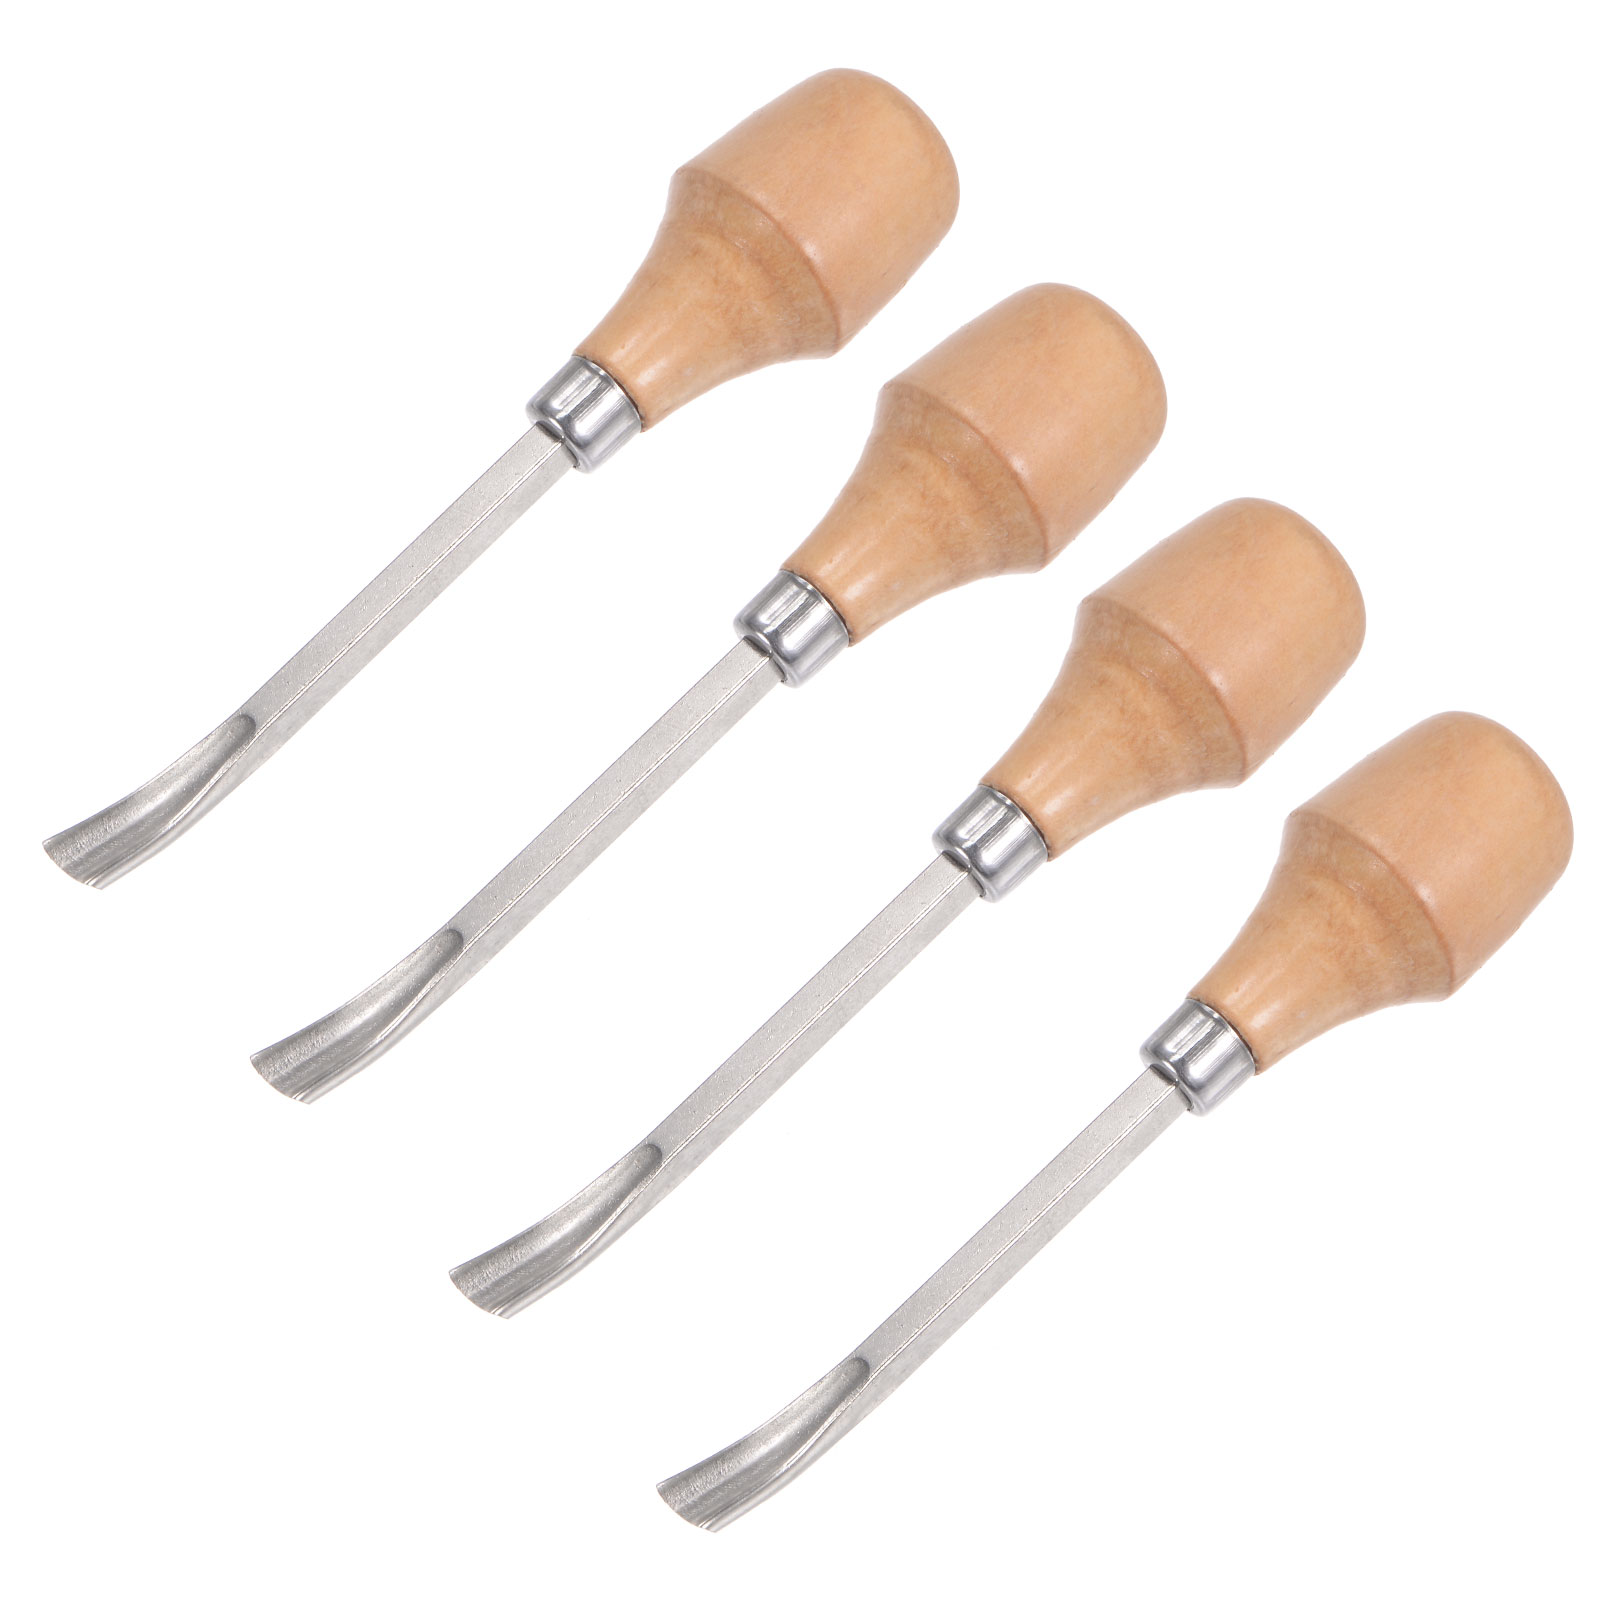 Uxcell 9mm Tip 5 Length Carbon Steel Curved Half-round Tip Wood Handle Wood  Carving Chisels 4 Pack 